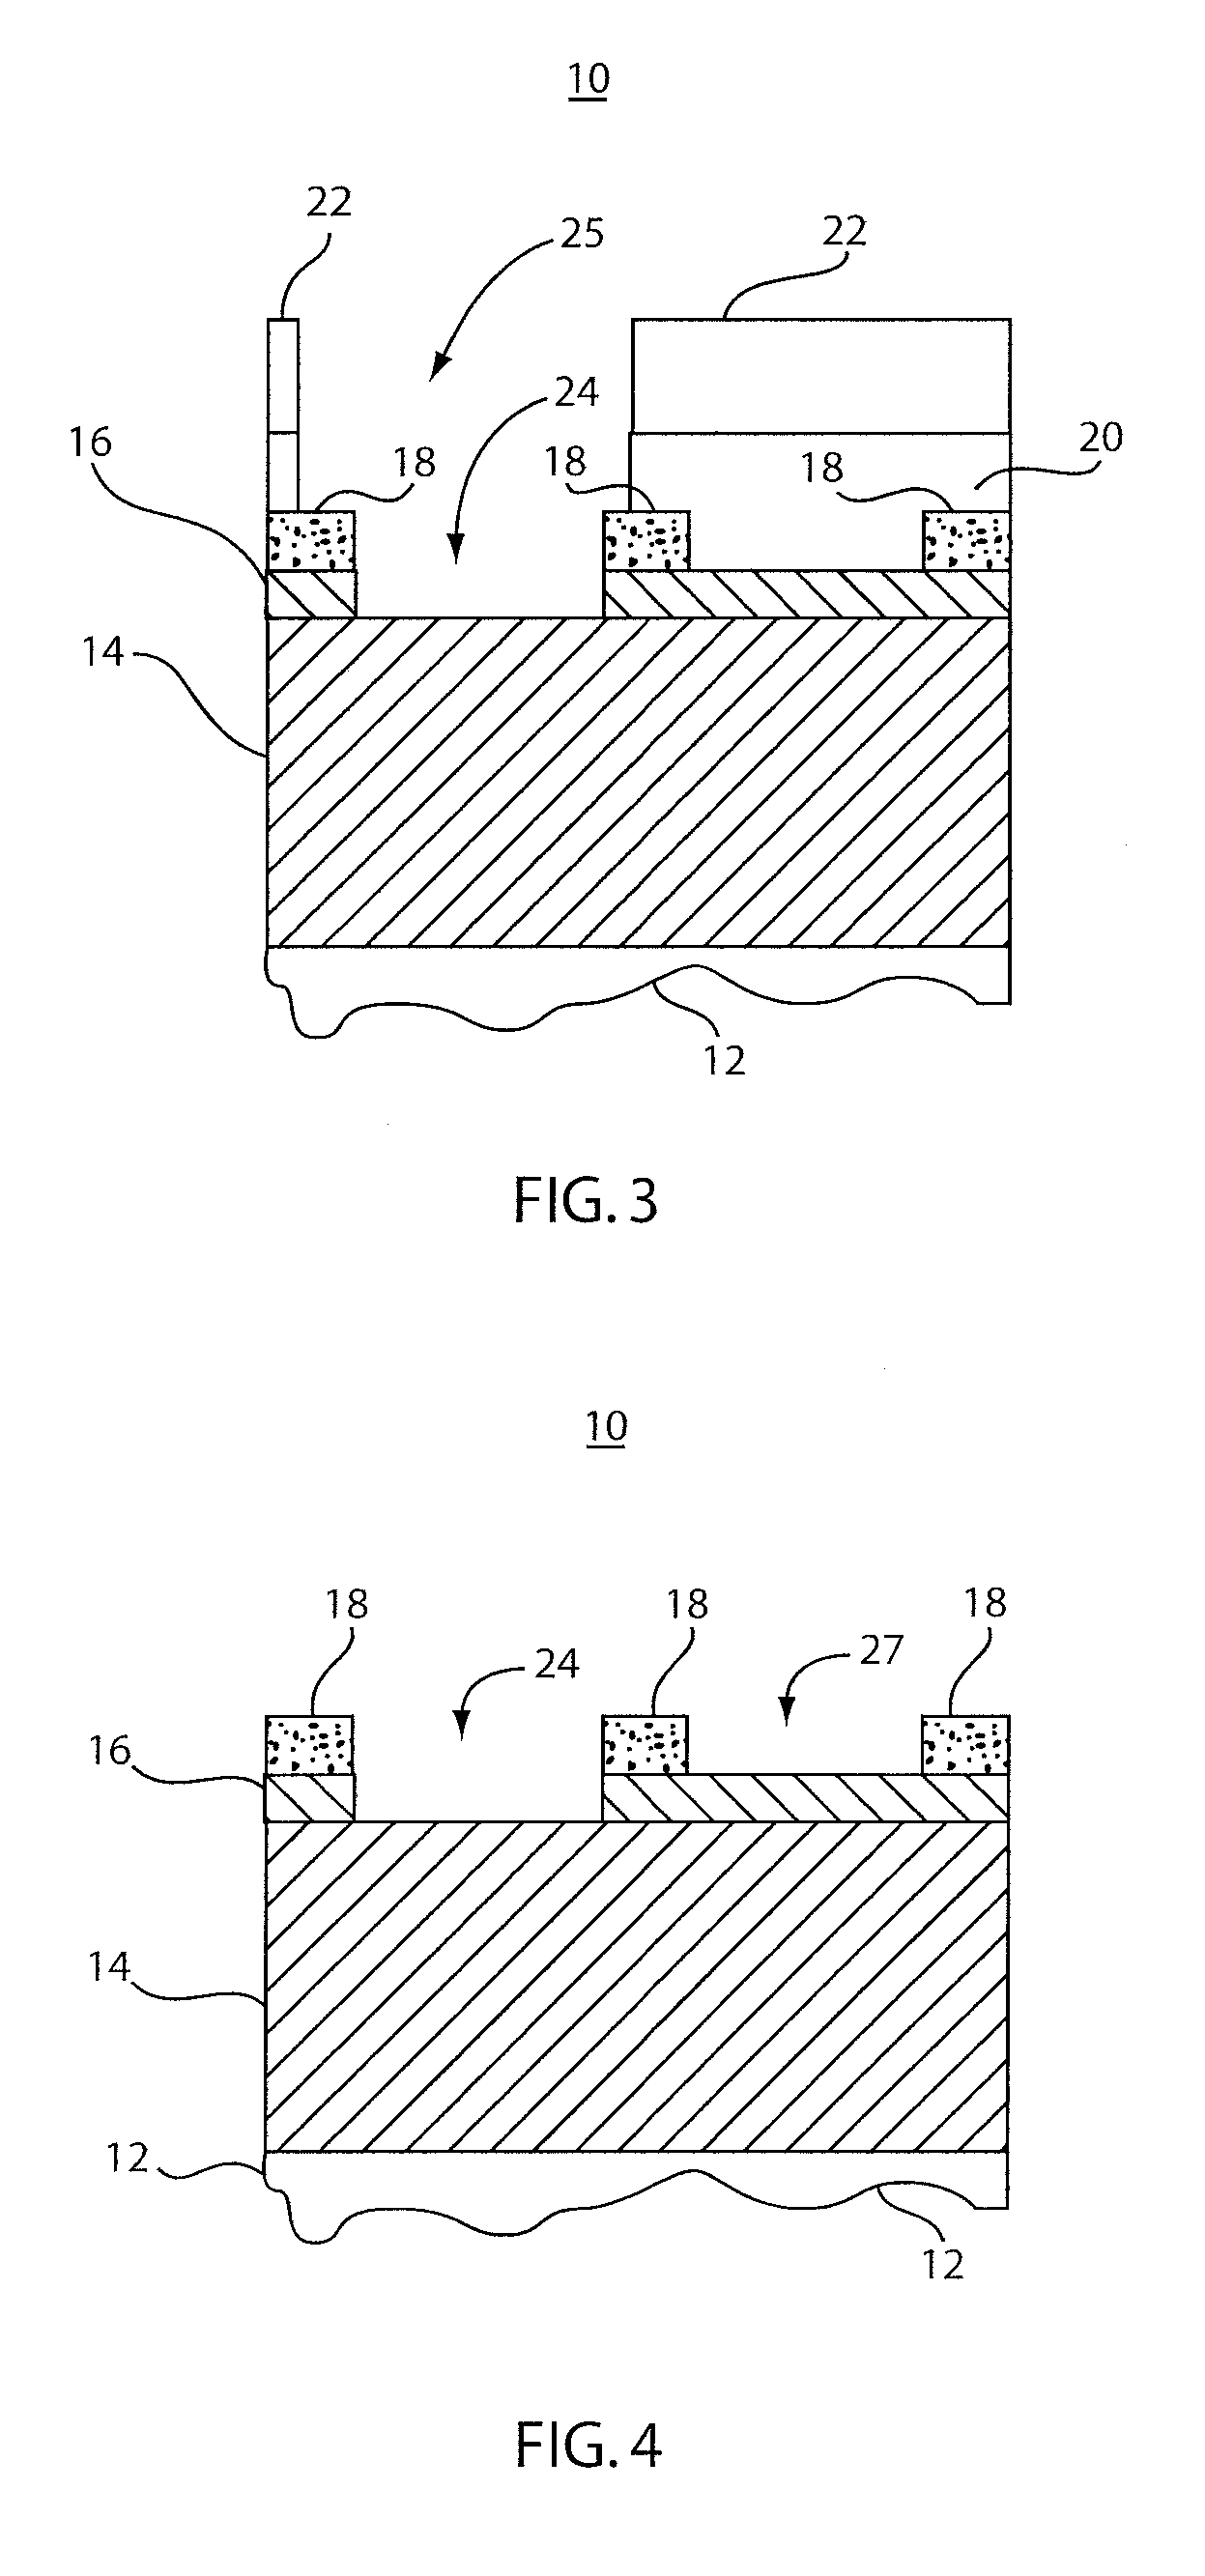 Crenulated wiring structure and method for integrated circuit interconnects